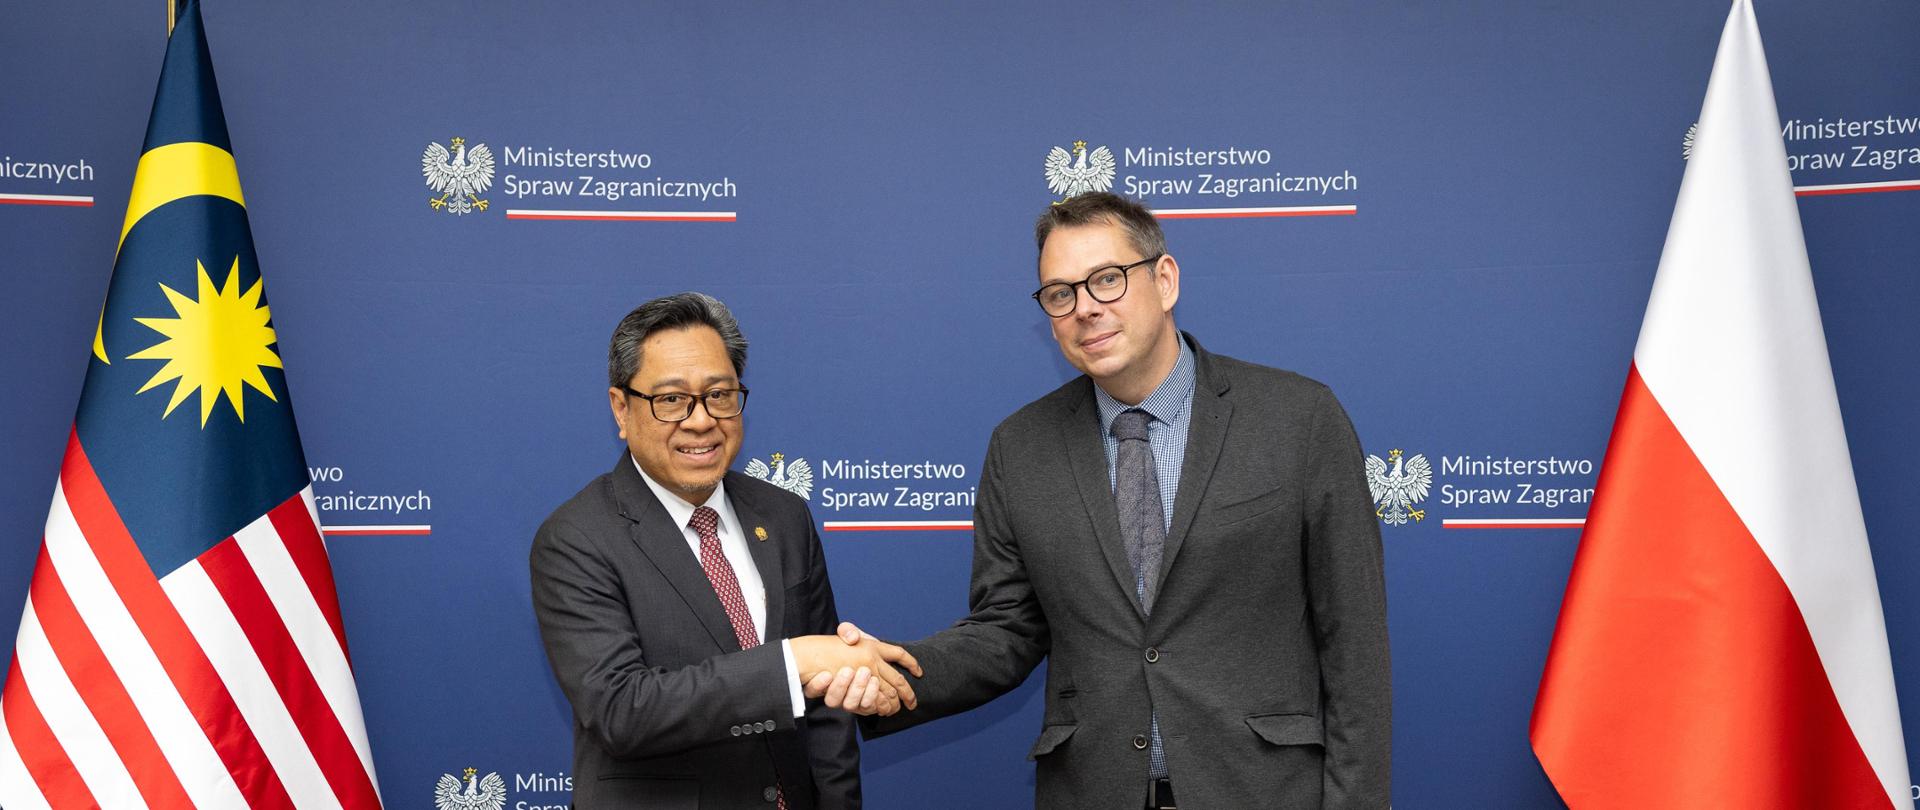 Undersecretary of State Jakub Wisniewski with the Deputy Secretary General of the Malaysian Foreign Ministry, Ahmad Roziani bin Abd. Ghani exchange a handshake against the background of the flags of Poland and Malaysia